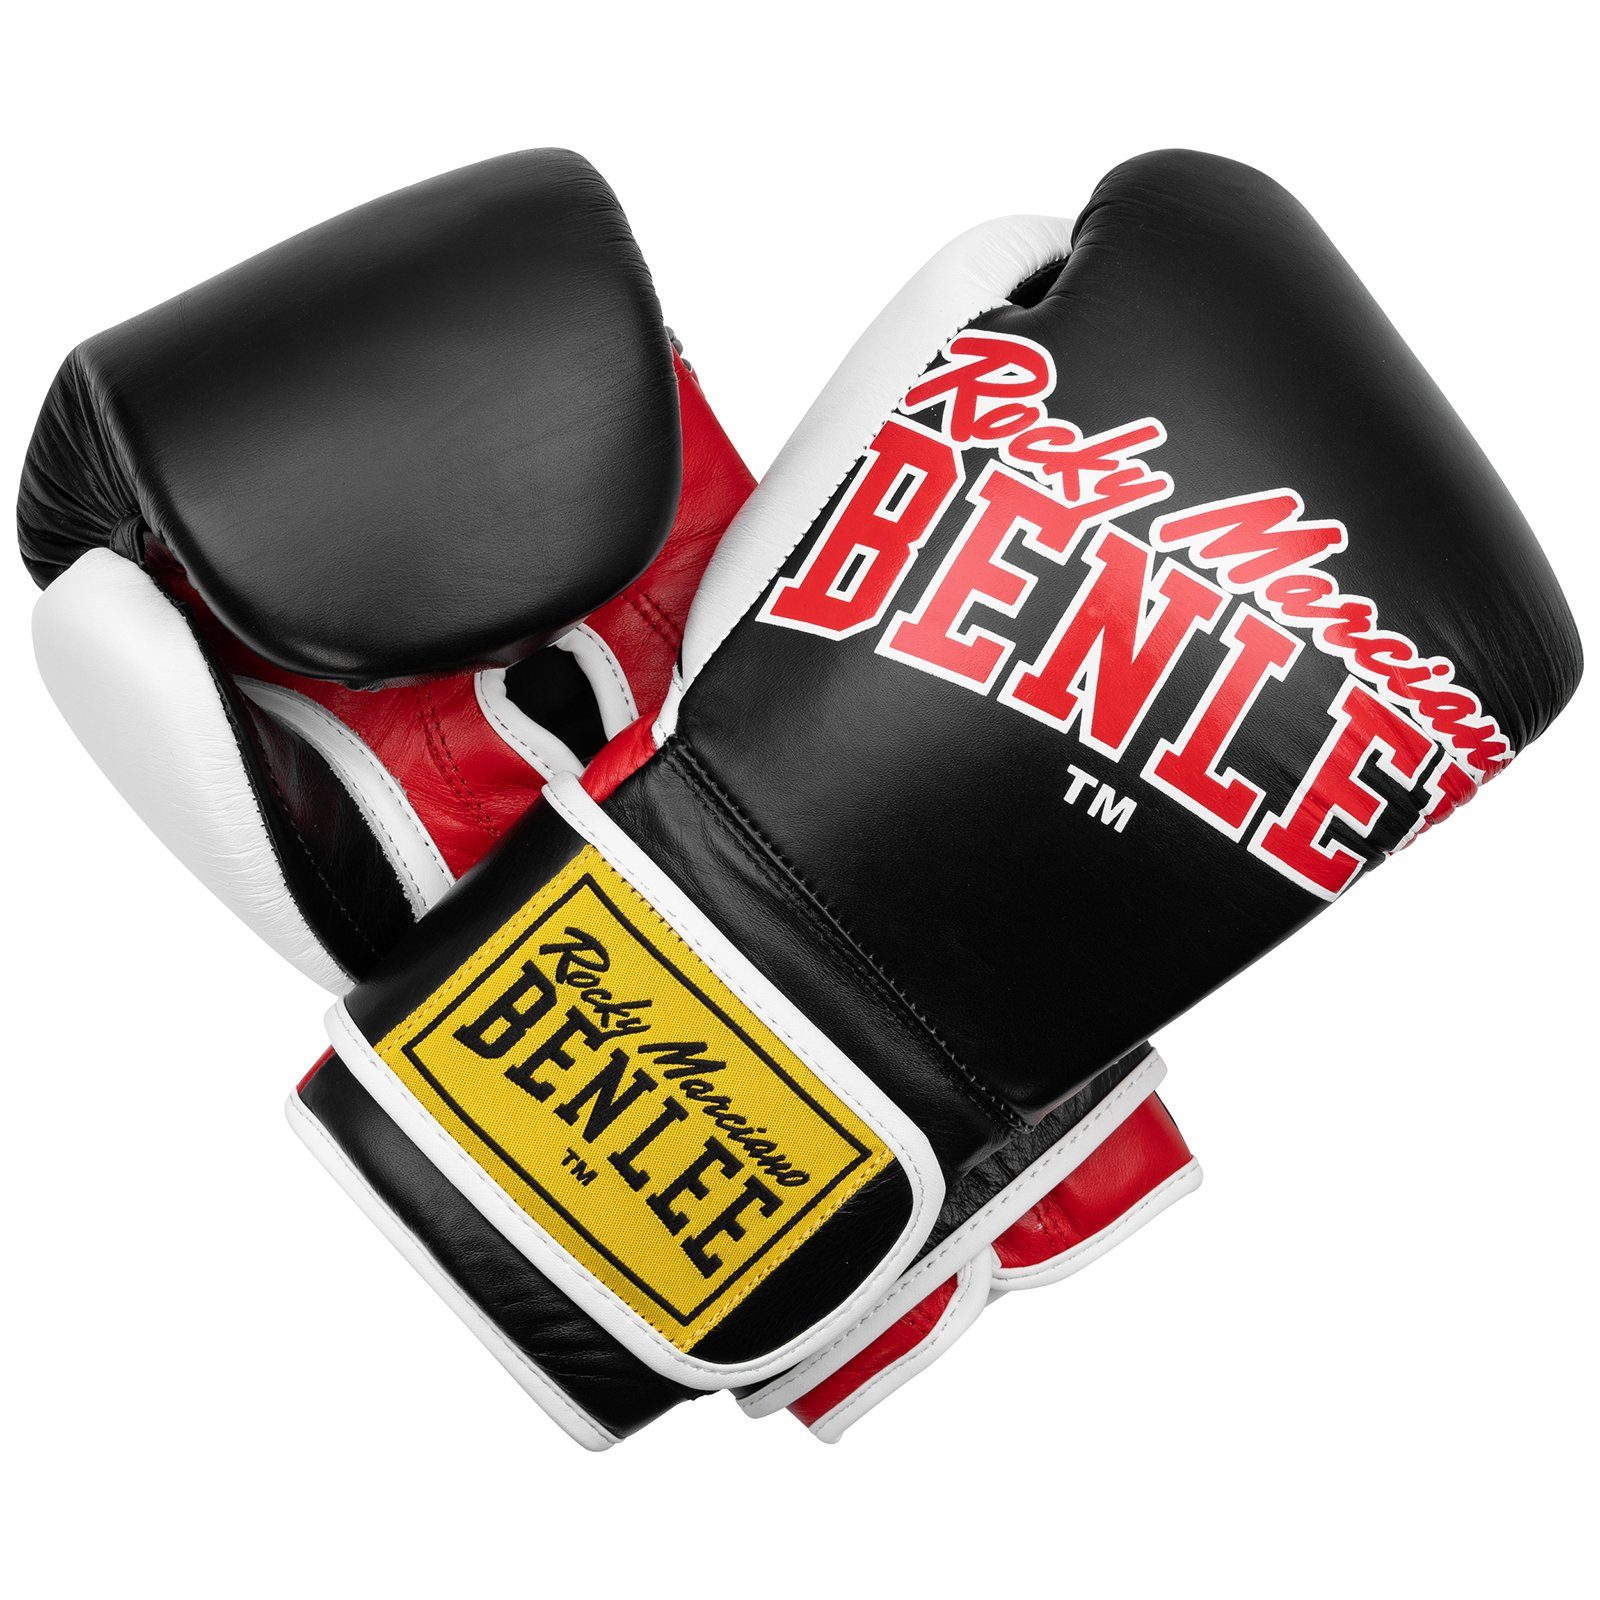 Marciano Benlee Boxhandschuhe LOOP Black/Red Rocky BANG